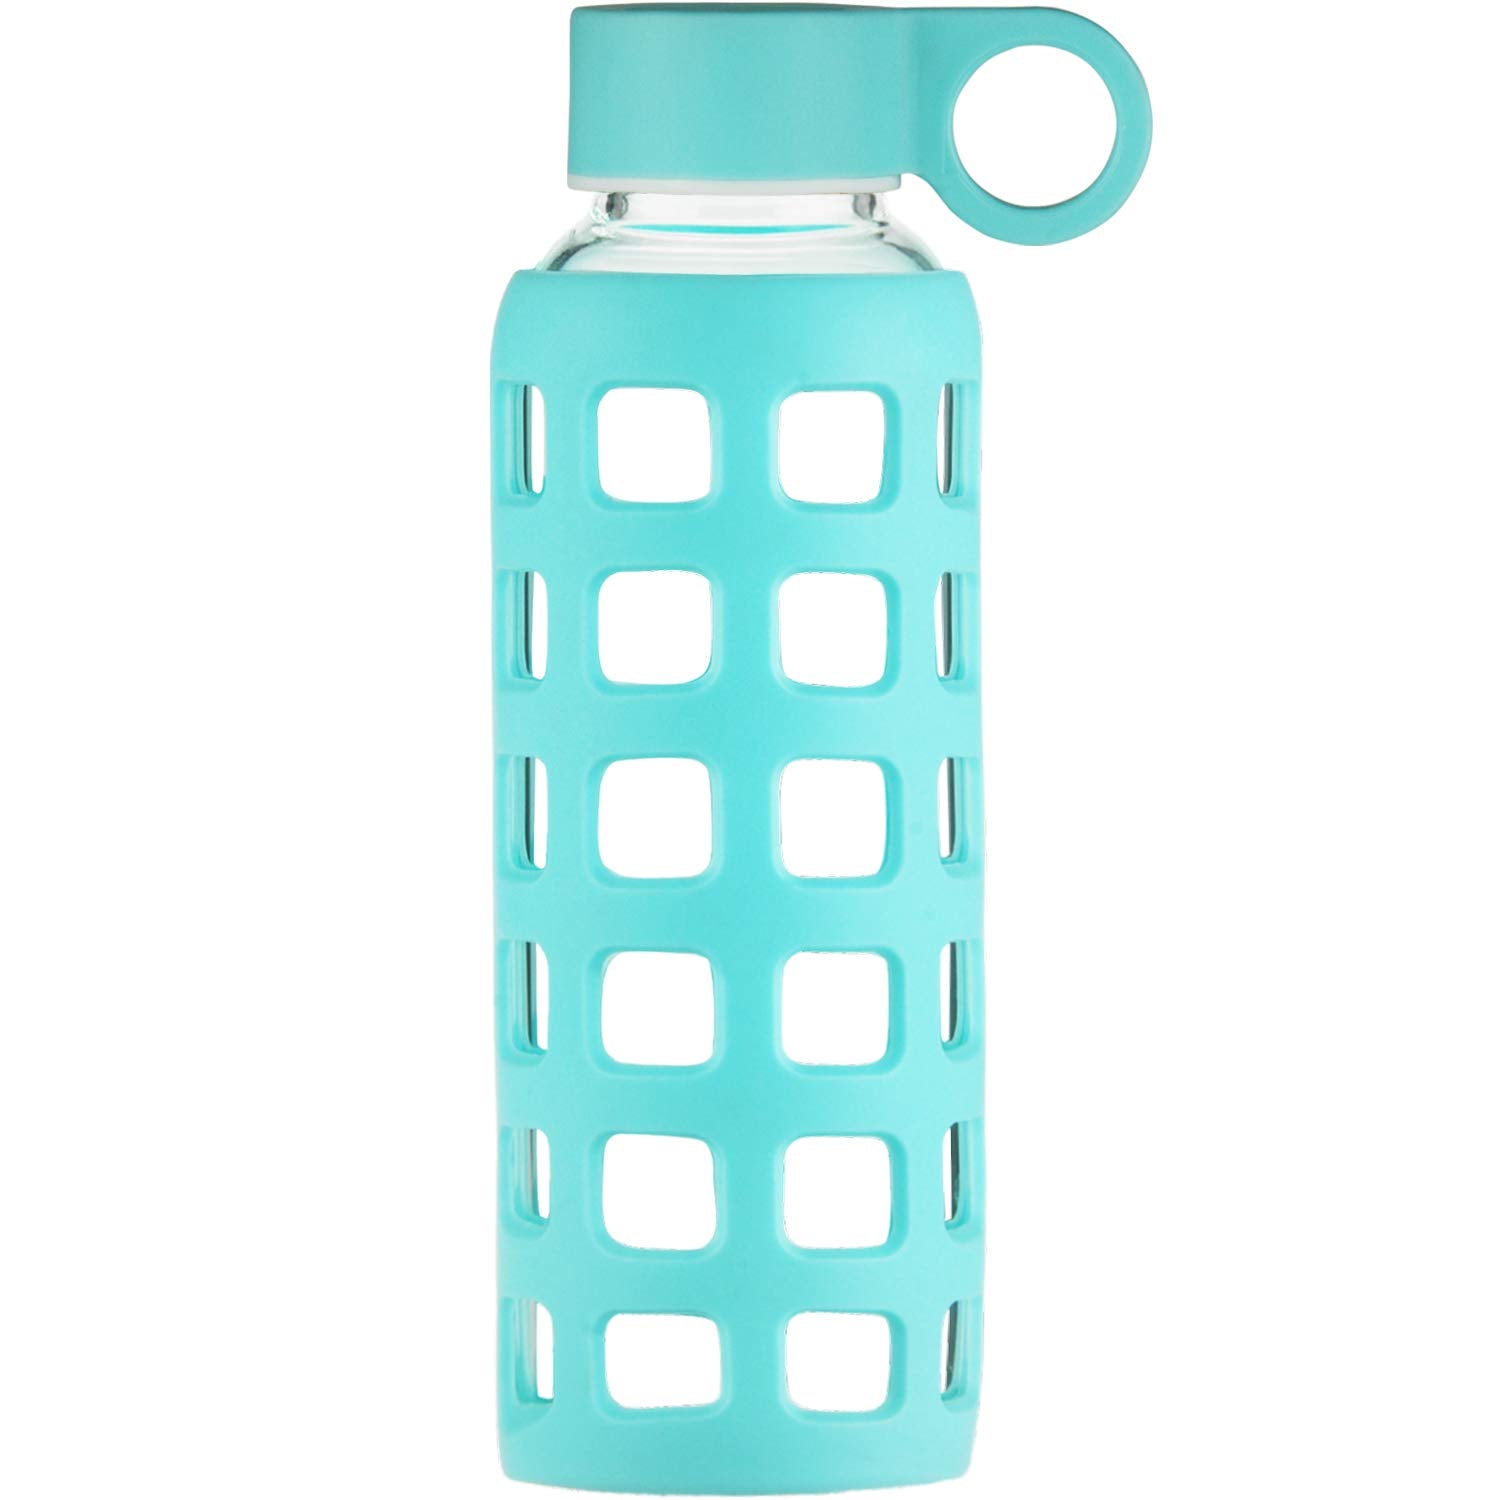 Rioware® Purifa Borosilicate Glass Water Bottle with Silicon Sleeve (7